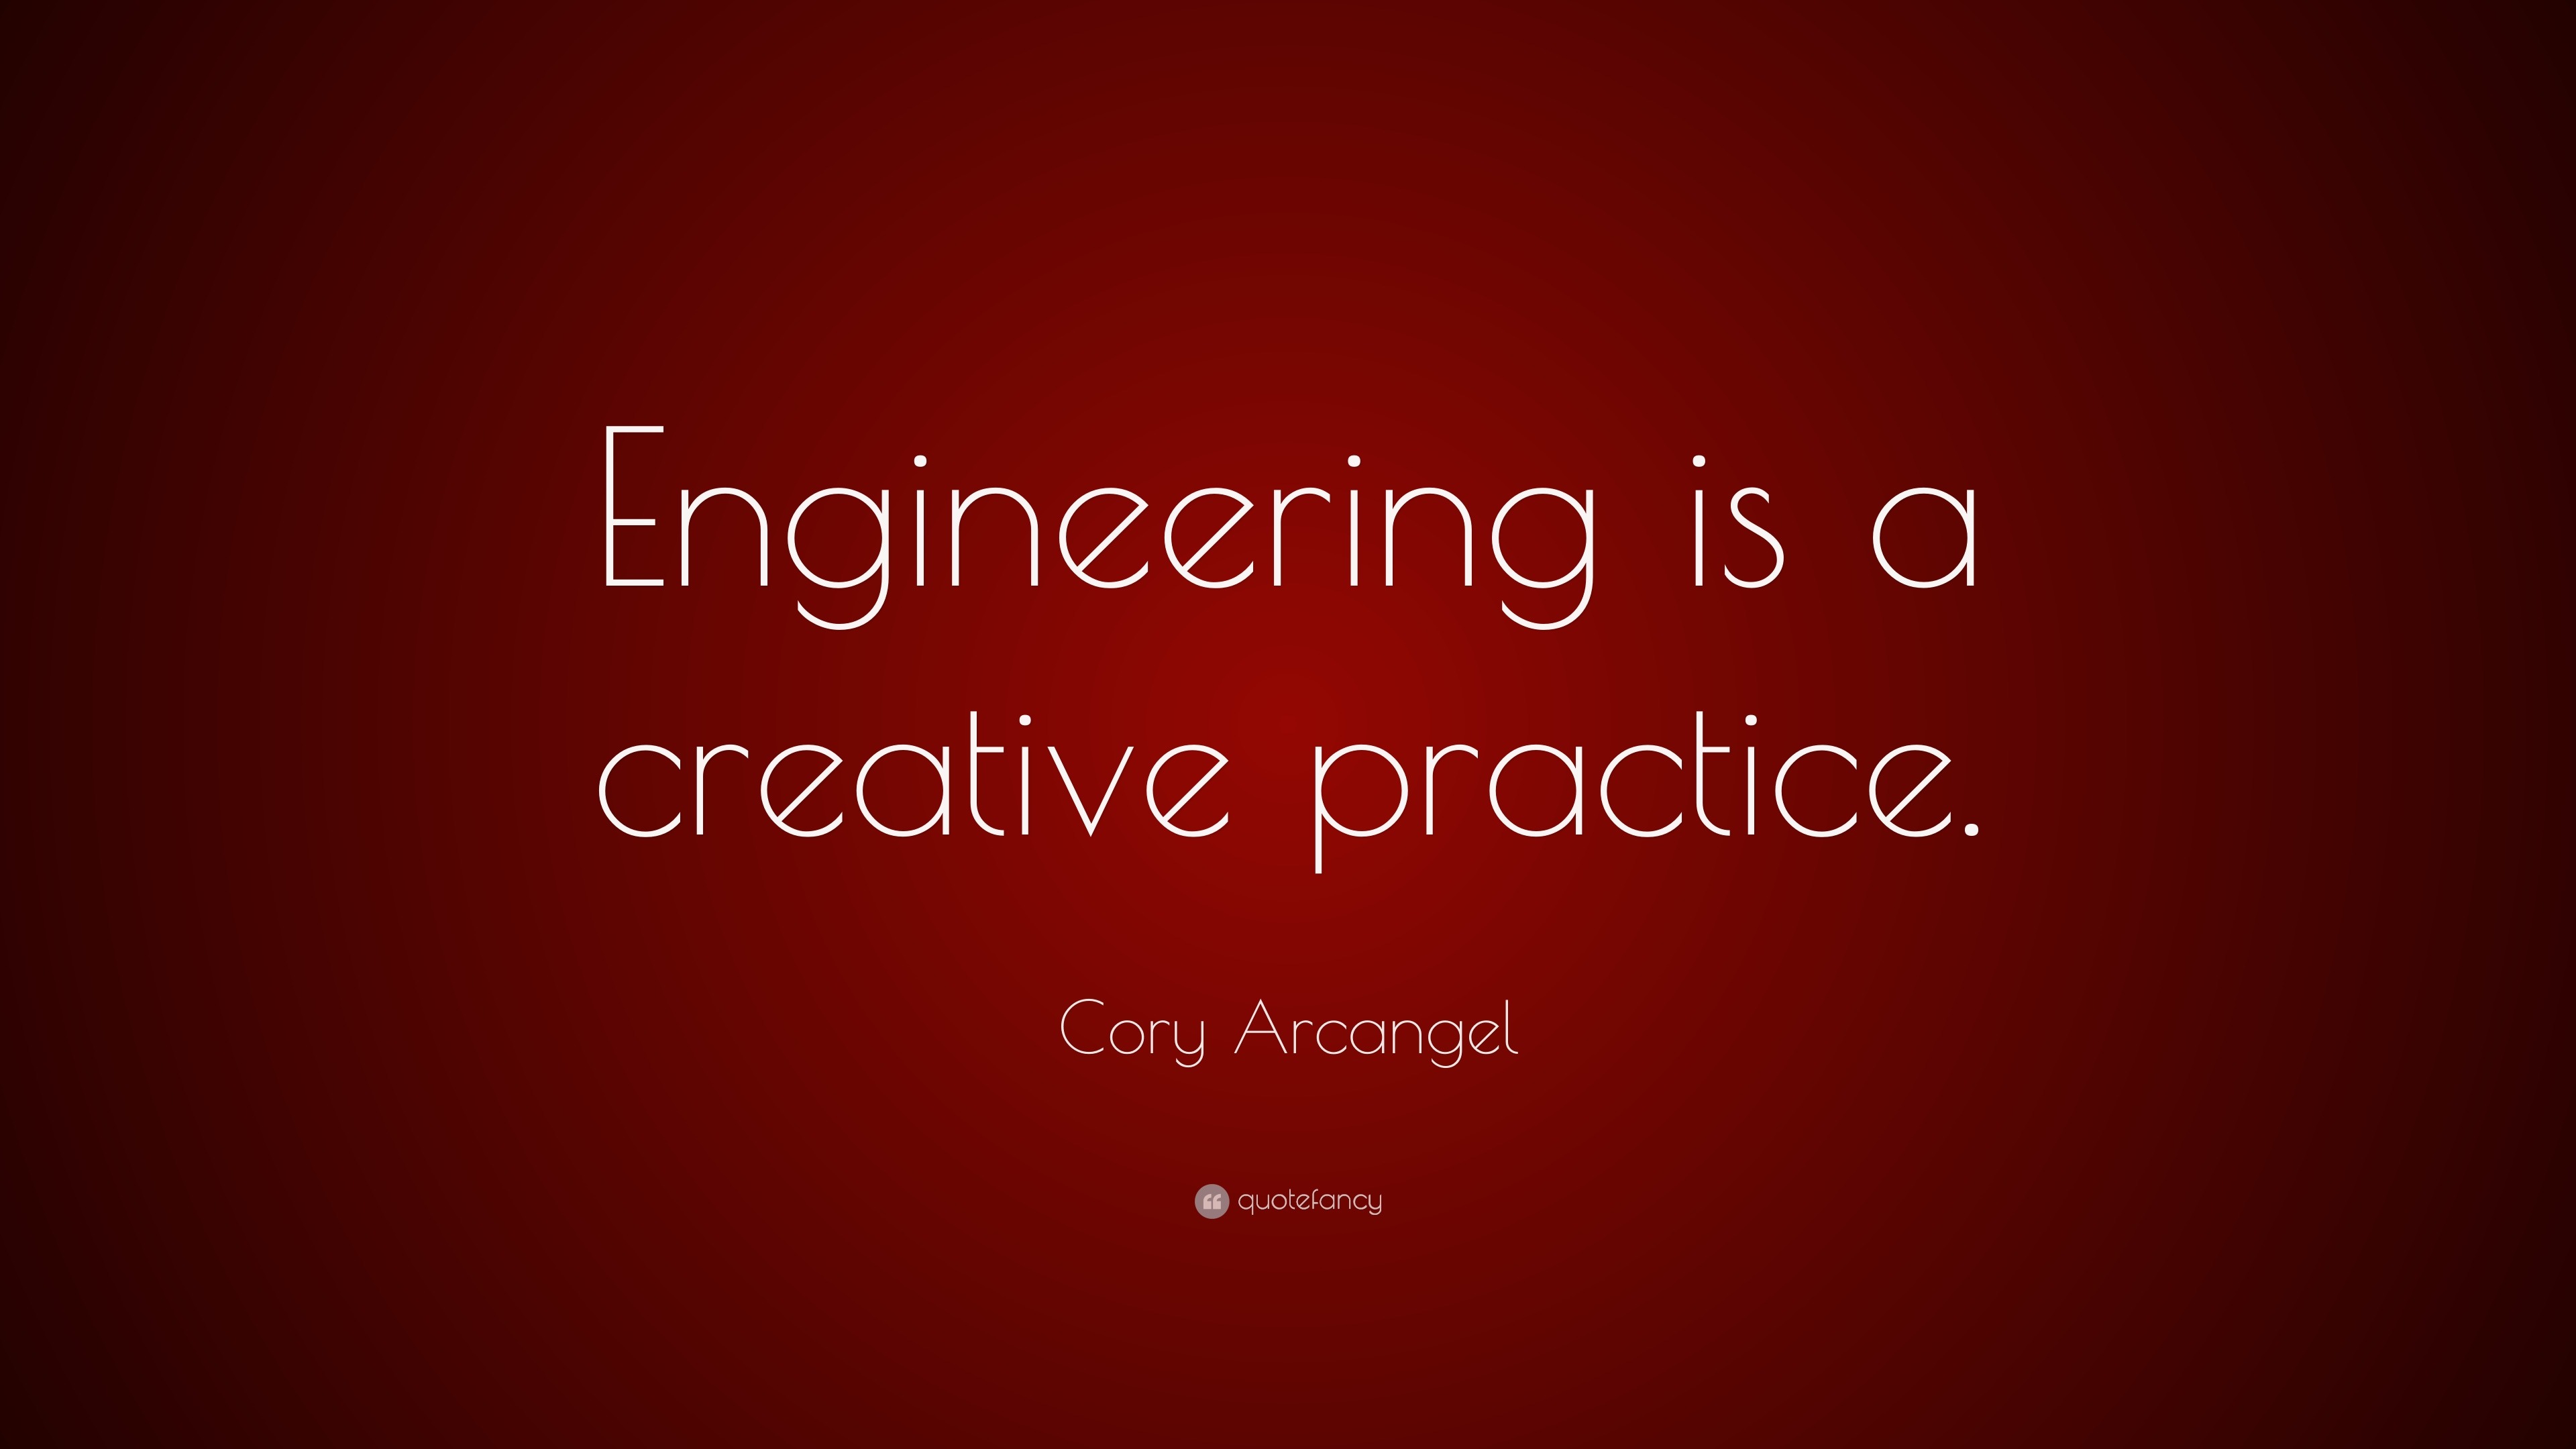 Engineering Quotes Hd Wallpaper